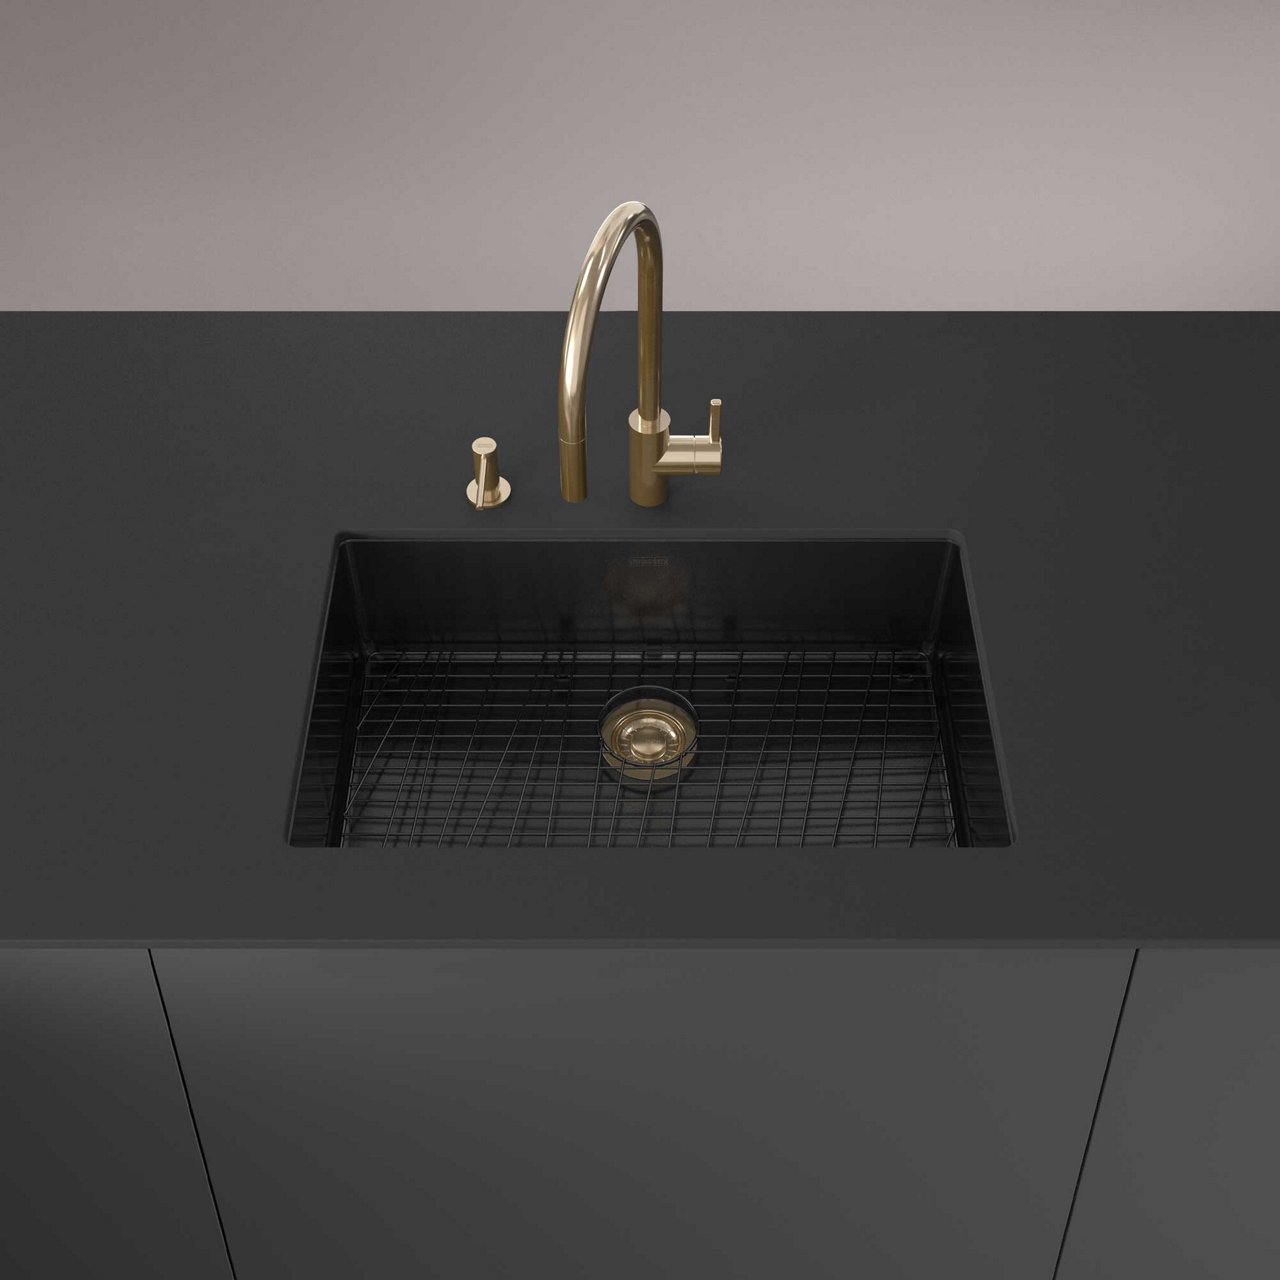 Kitchen island featuring a Mythos Masterpiece undermount kitchen sink in Anthracite paired with a gold Eos Neo faucet and matching soap dispenser.